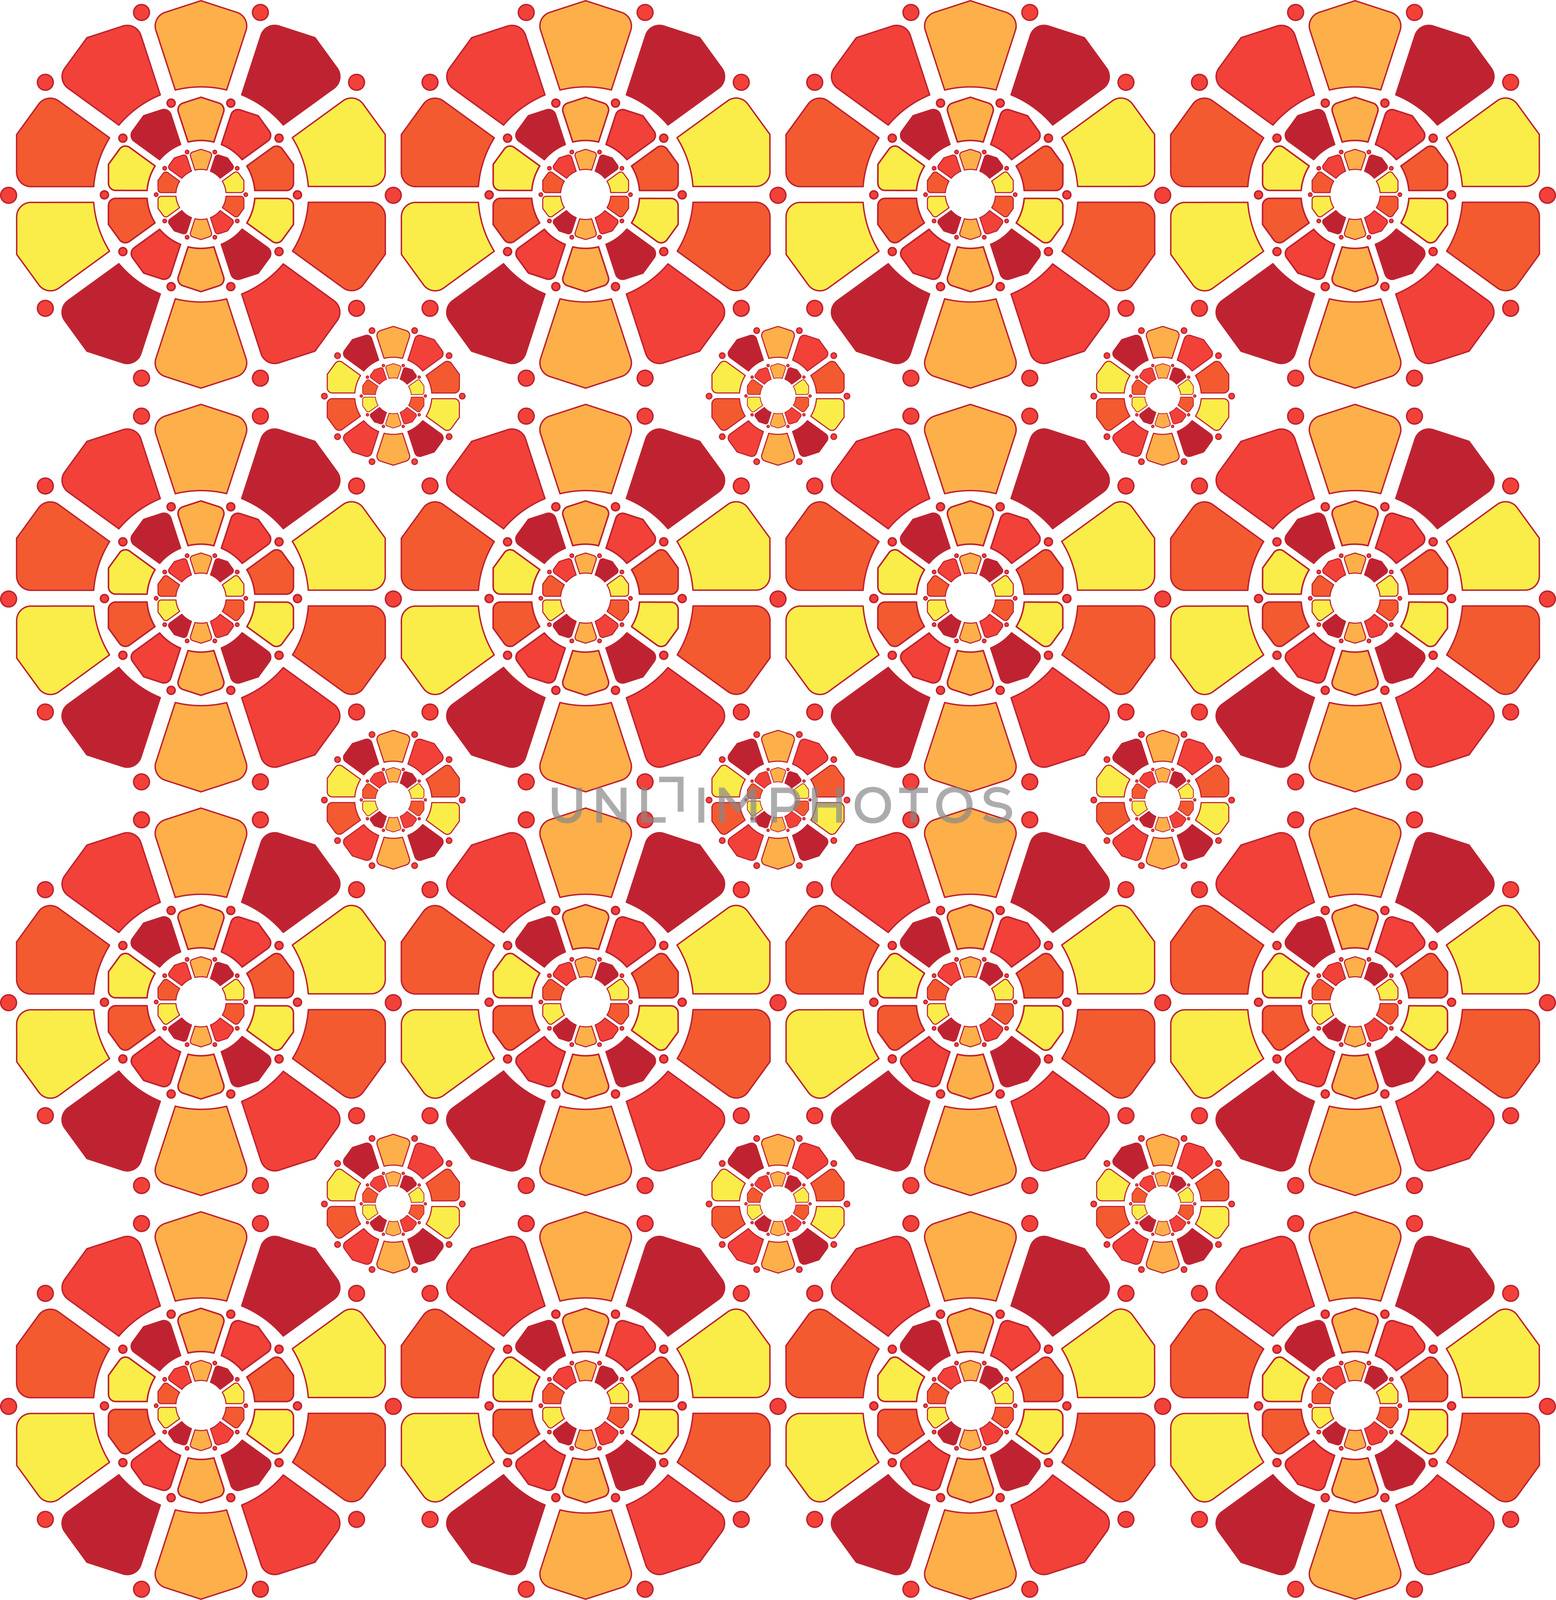 background or fabric mandala flower pattern red and yellow color